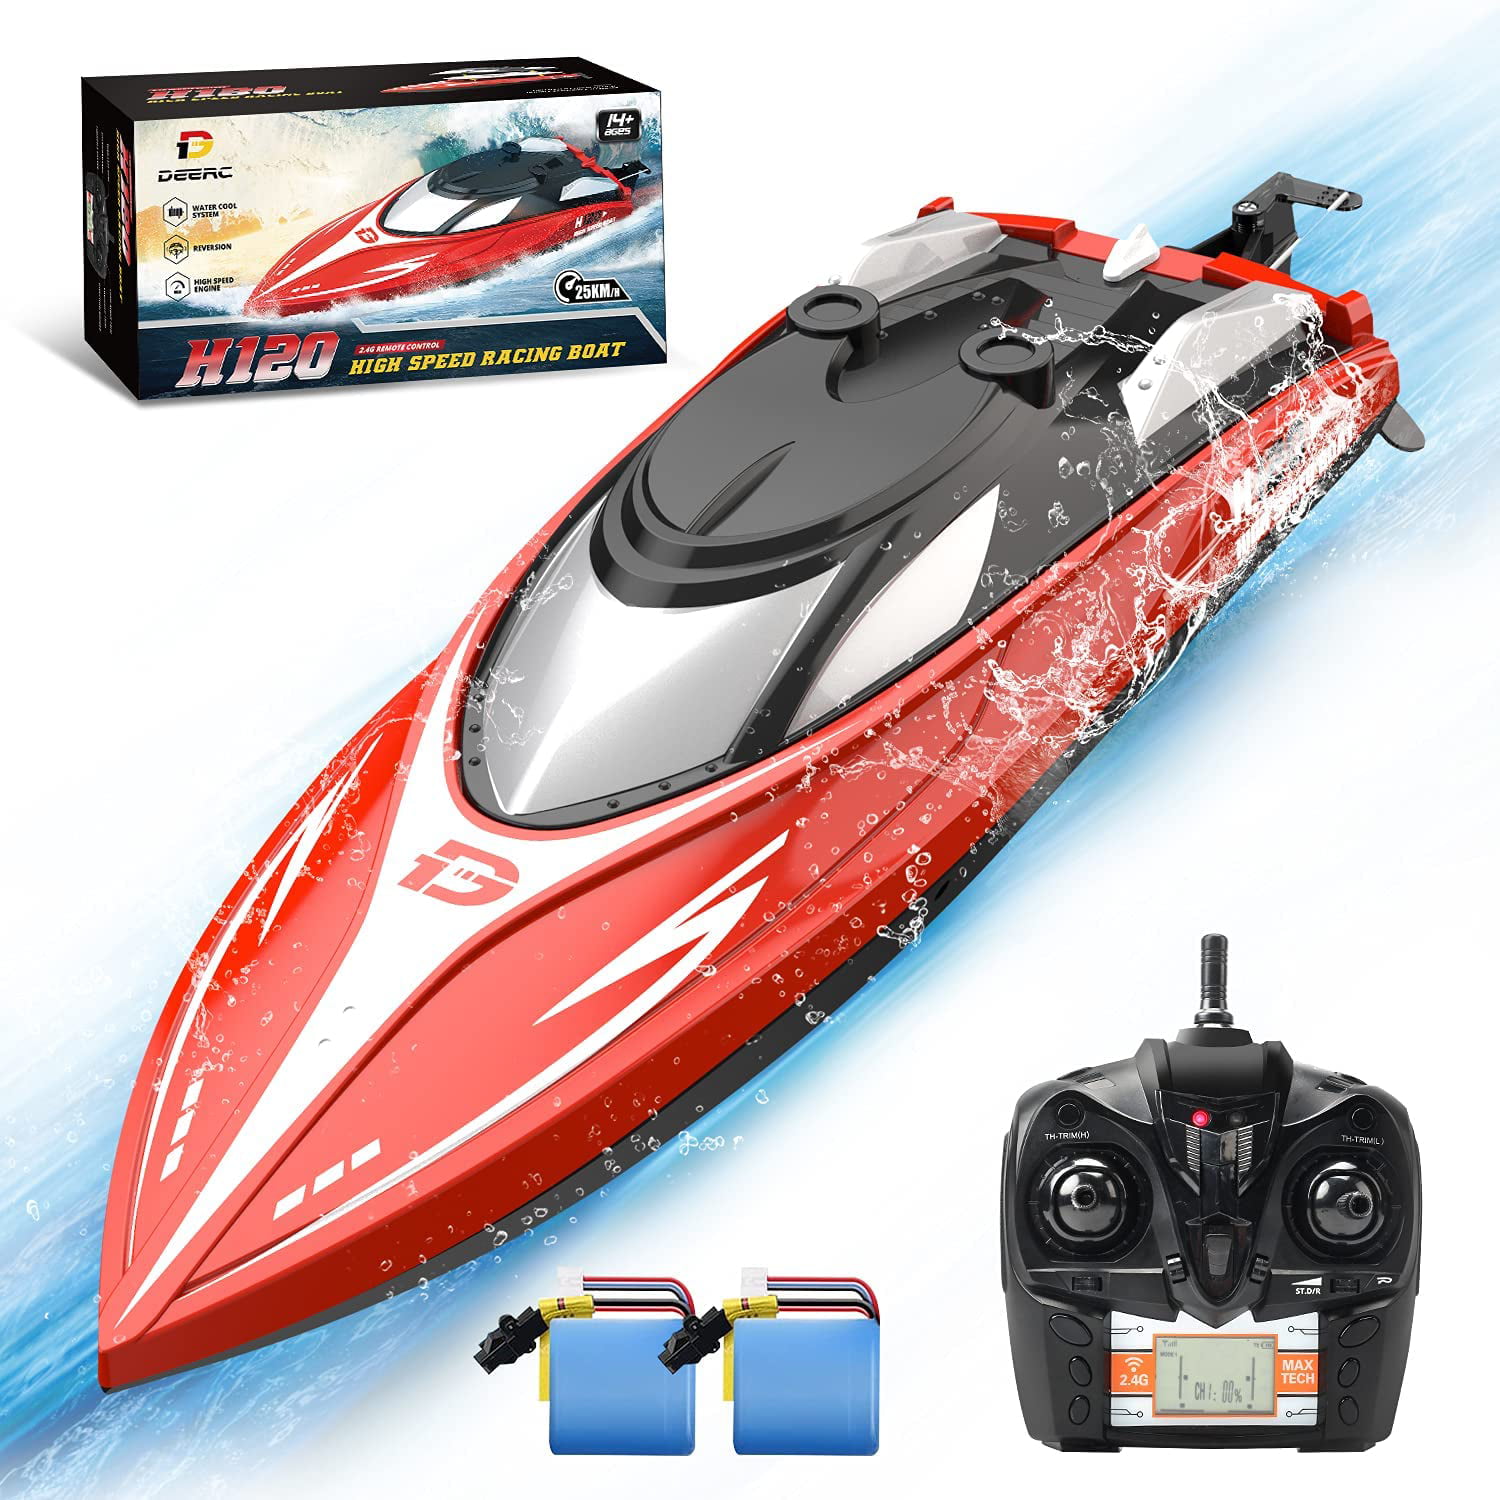 Toy Boat Bath Toys Black Vinmax Mini RC Water Boat Toy Remote Control Boat Plastic Model Submarine Ship Electric Toy Fits for Swimming Pool Beaches and Tubs